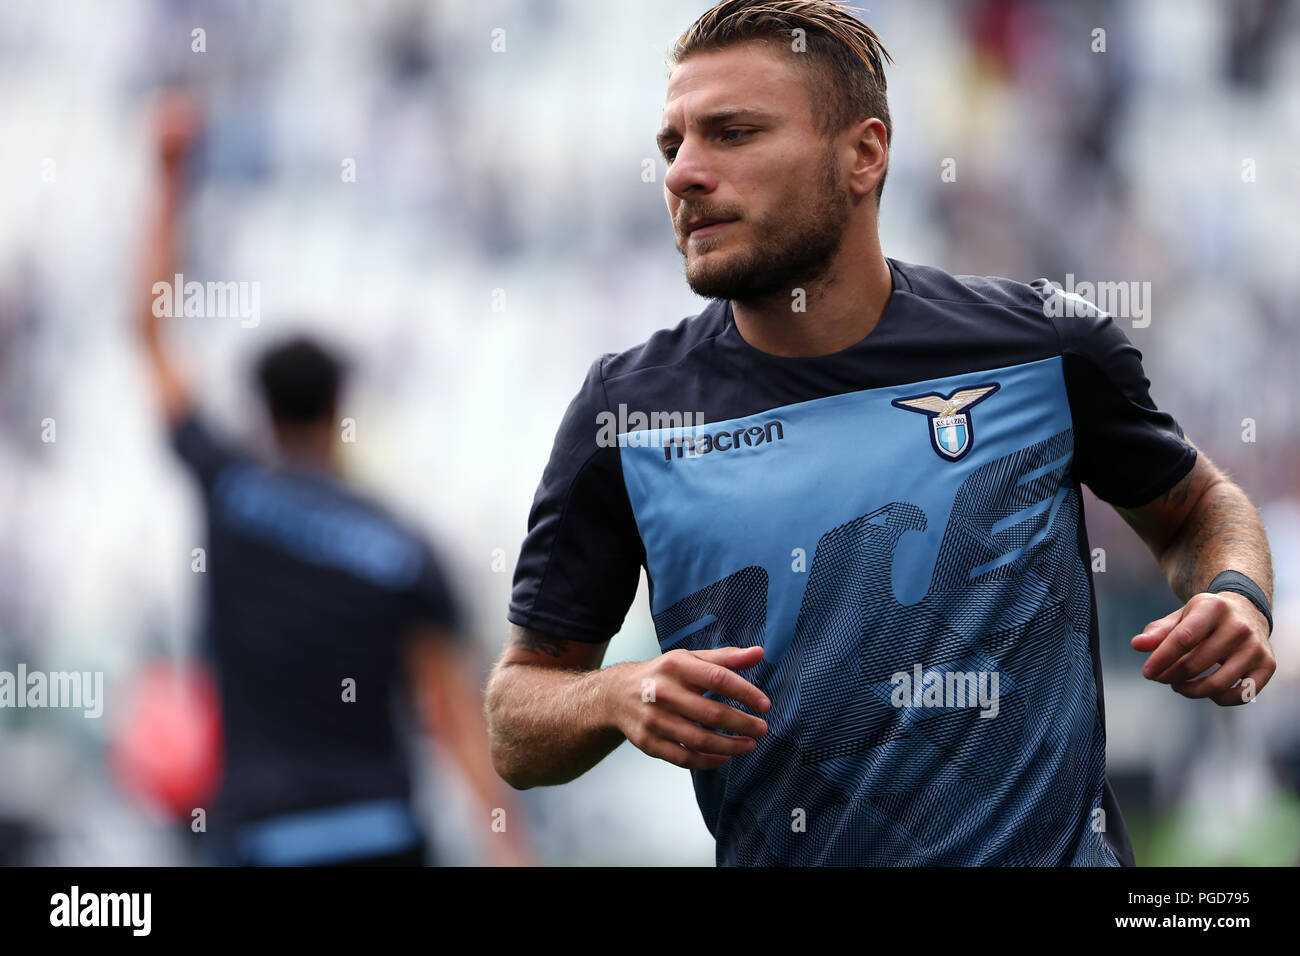 Torino, Italy. 25th August, 2018. Ciro Immobile  of SS Lazio  during the Serie A football match between Juventus Fc and SS Lazio.  Credit: Marco Canoniero / Alamy Live News  . Credit: Marco Canoniero/Alamy Live News Stock Photo